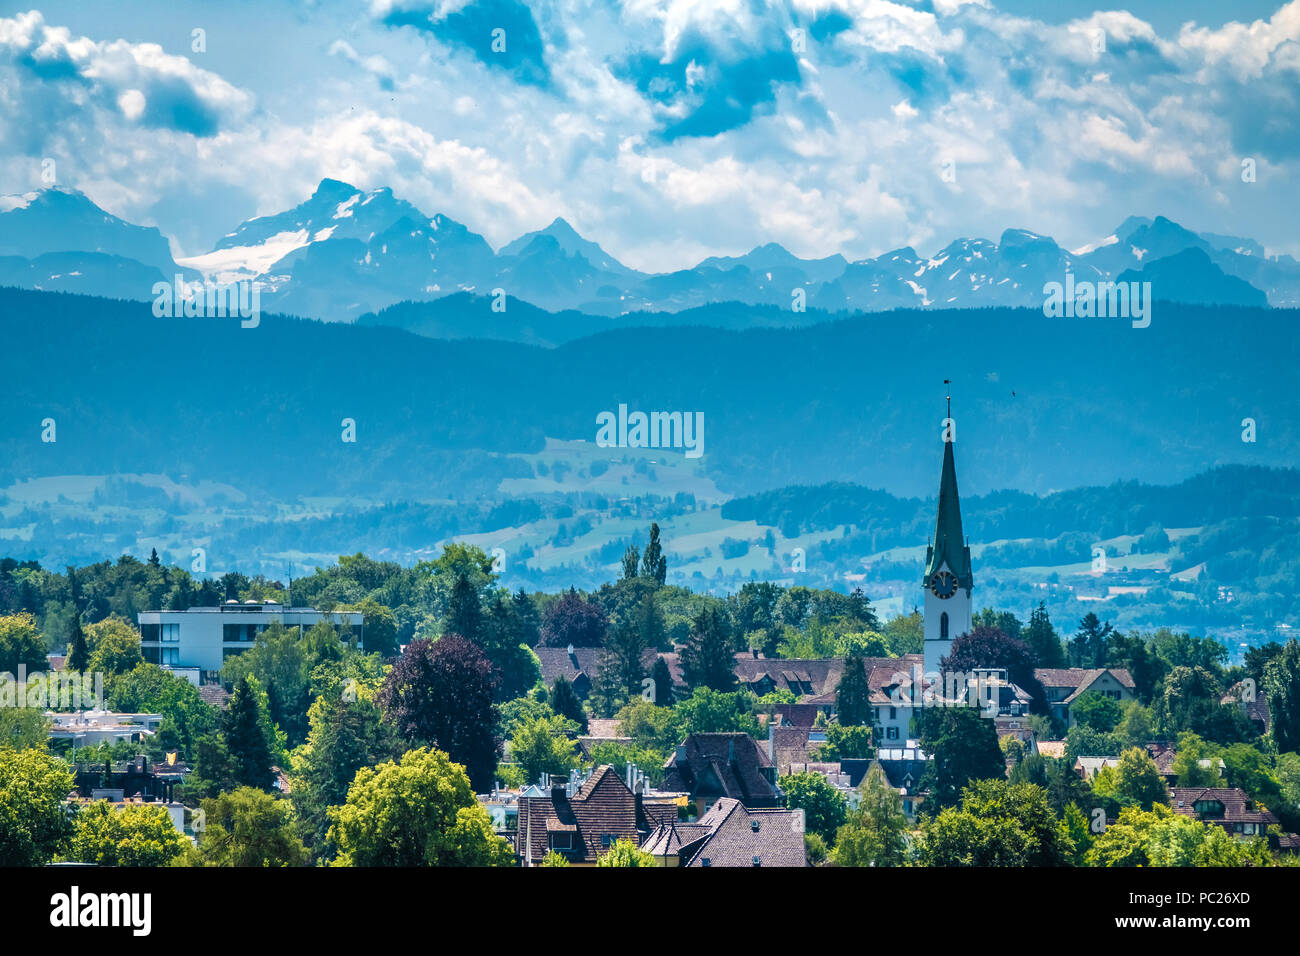 Distant view of the city of Zoolikon from the wine terraces of Weinegg district of the city of , Zurich, Switzerland Stock Photo